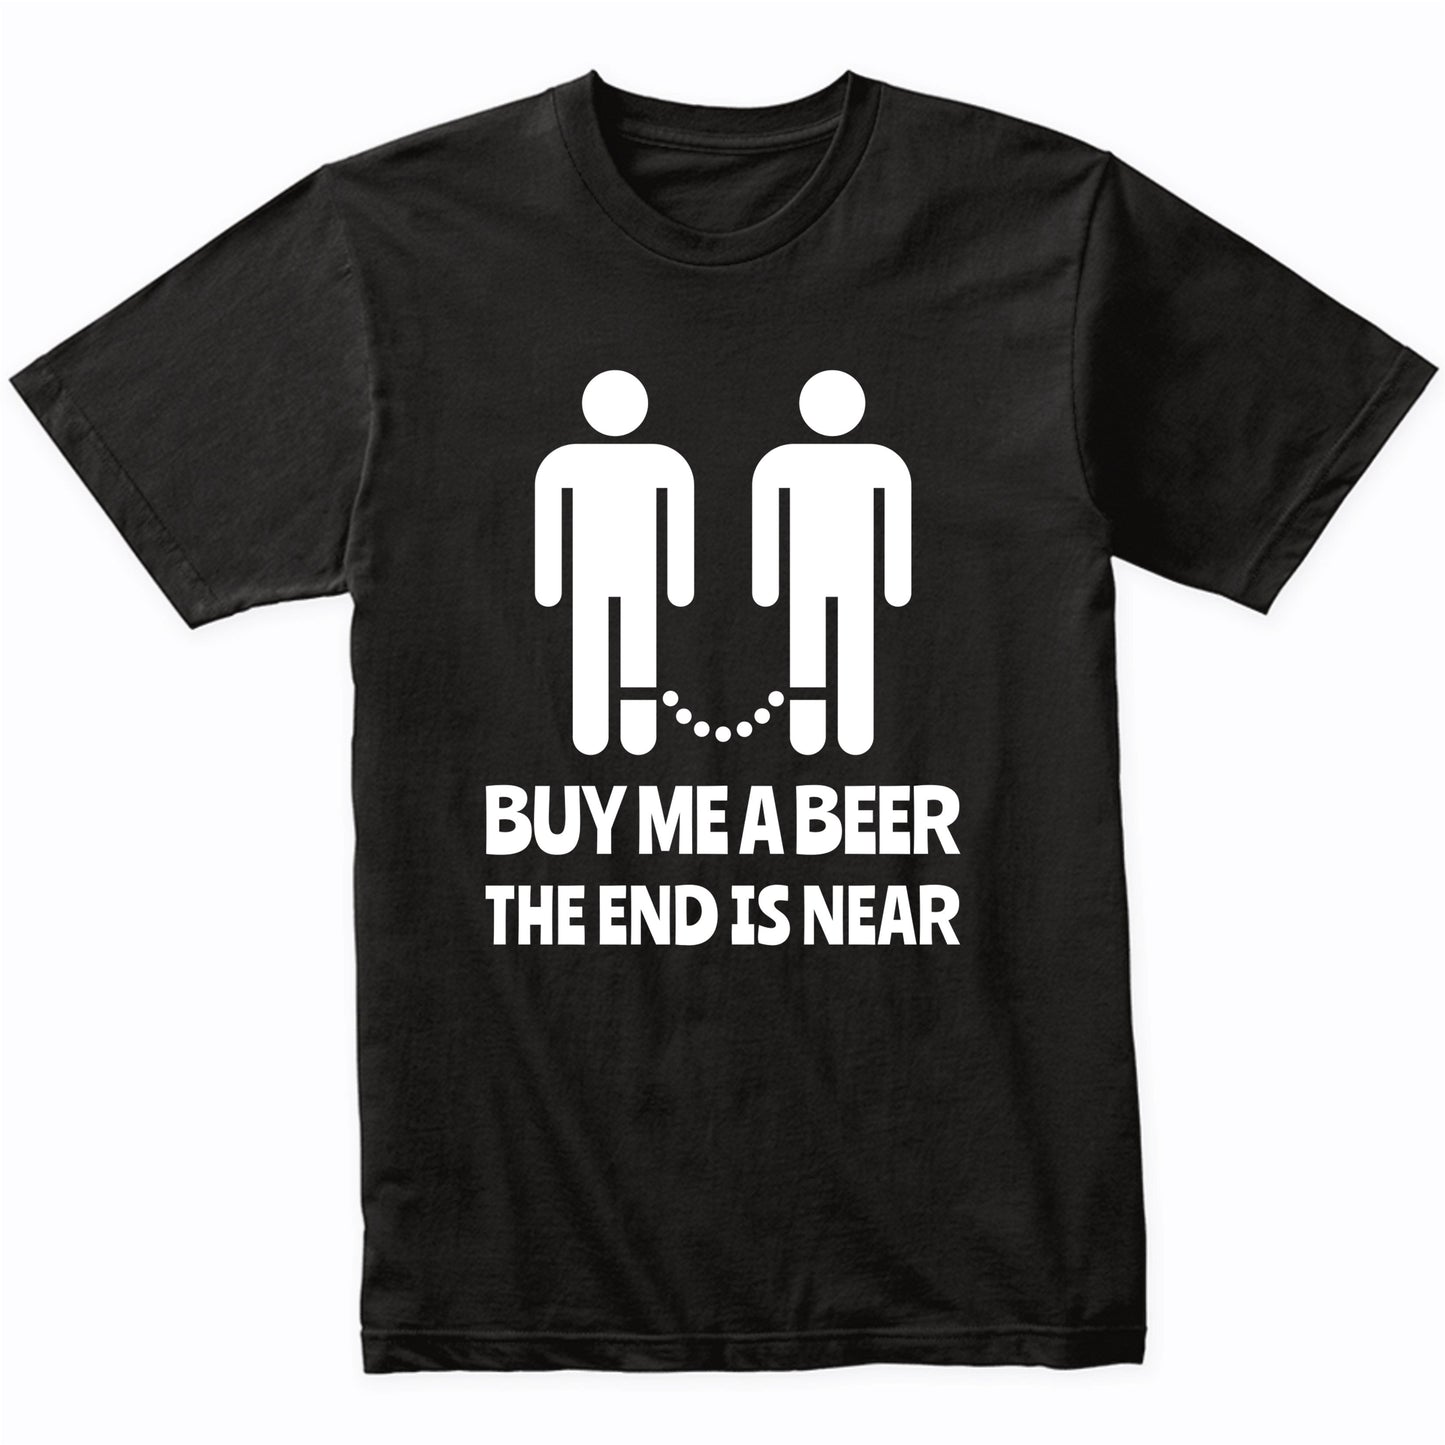 Funny Gay Wedding Bachelor Party Shirt - Buy Me A Beer The End Is Near